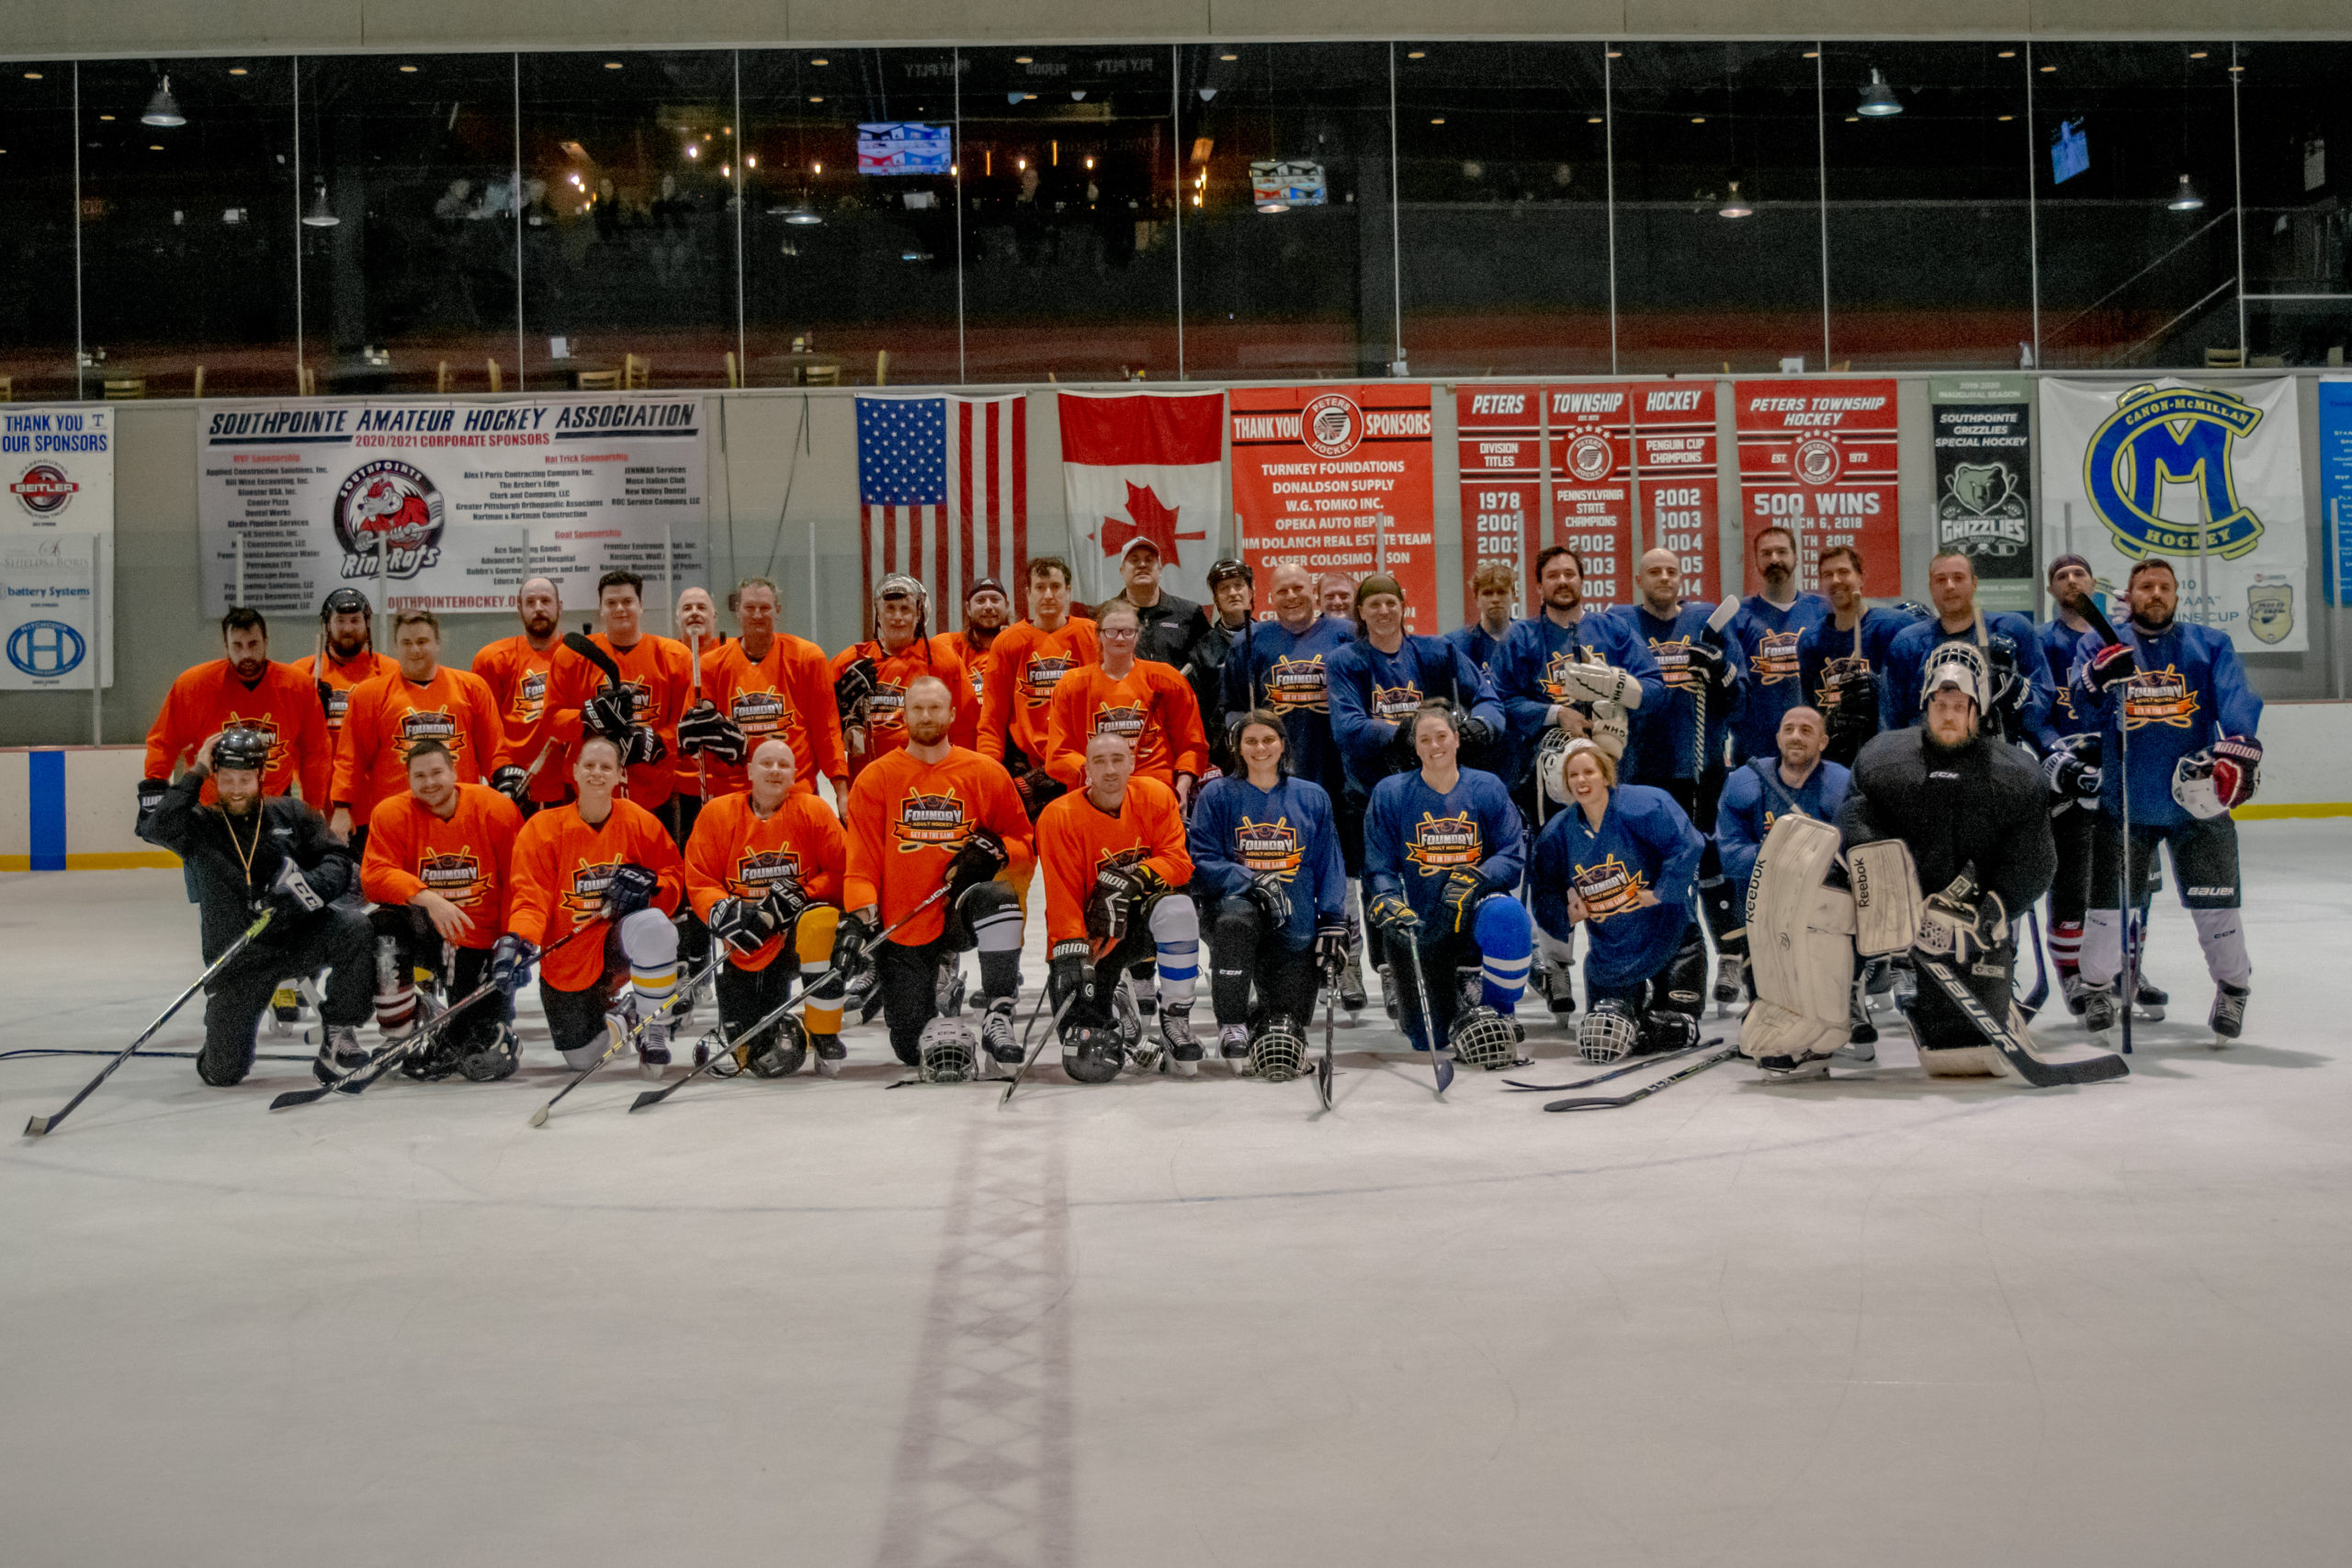 Foundry Adult Hockey Group on the ice